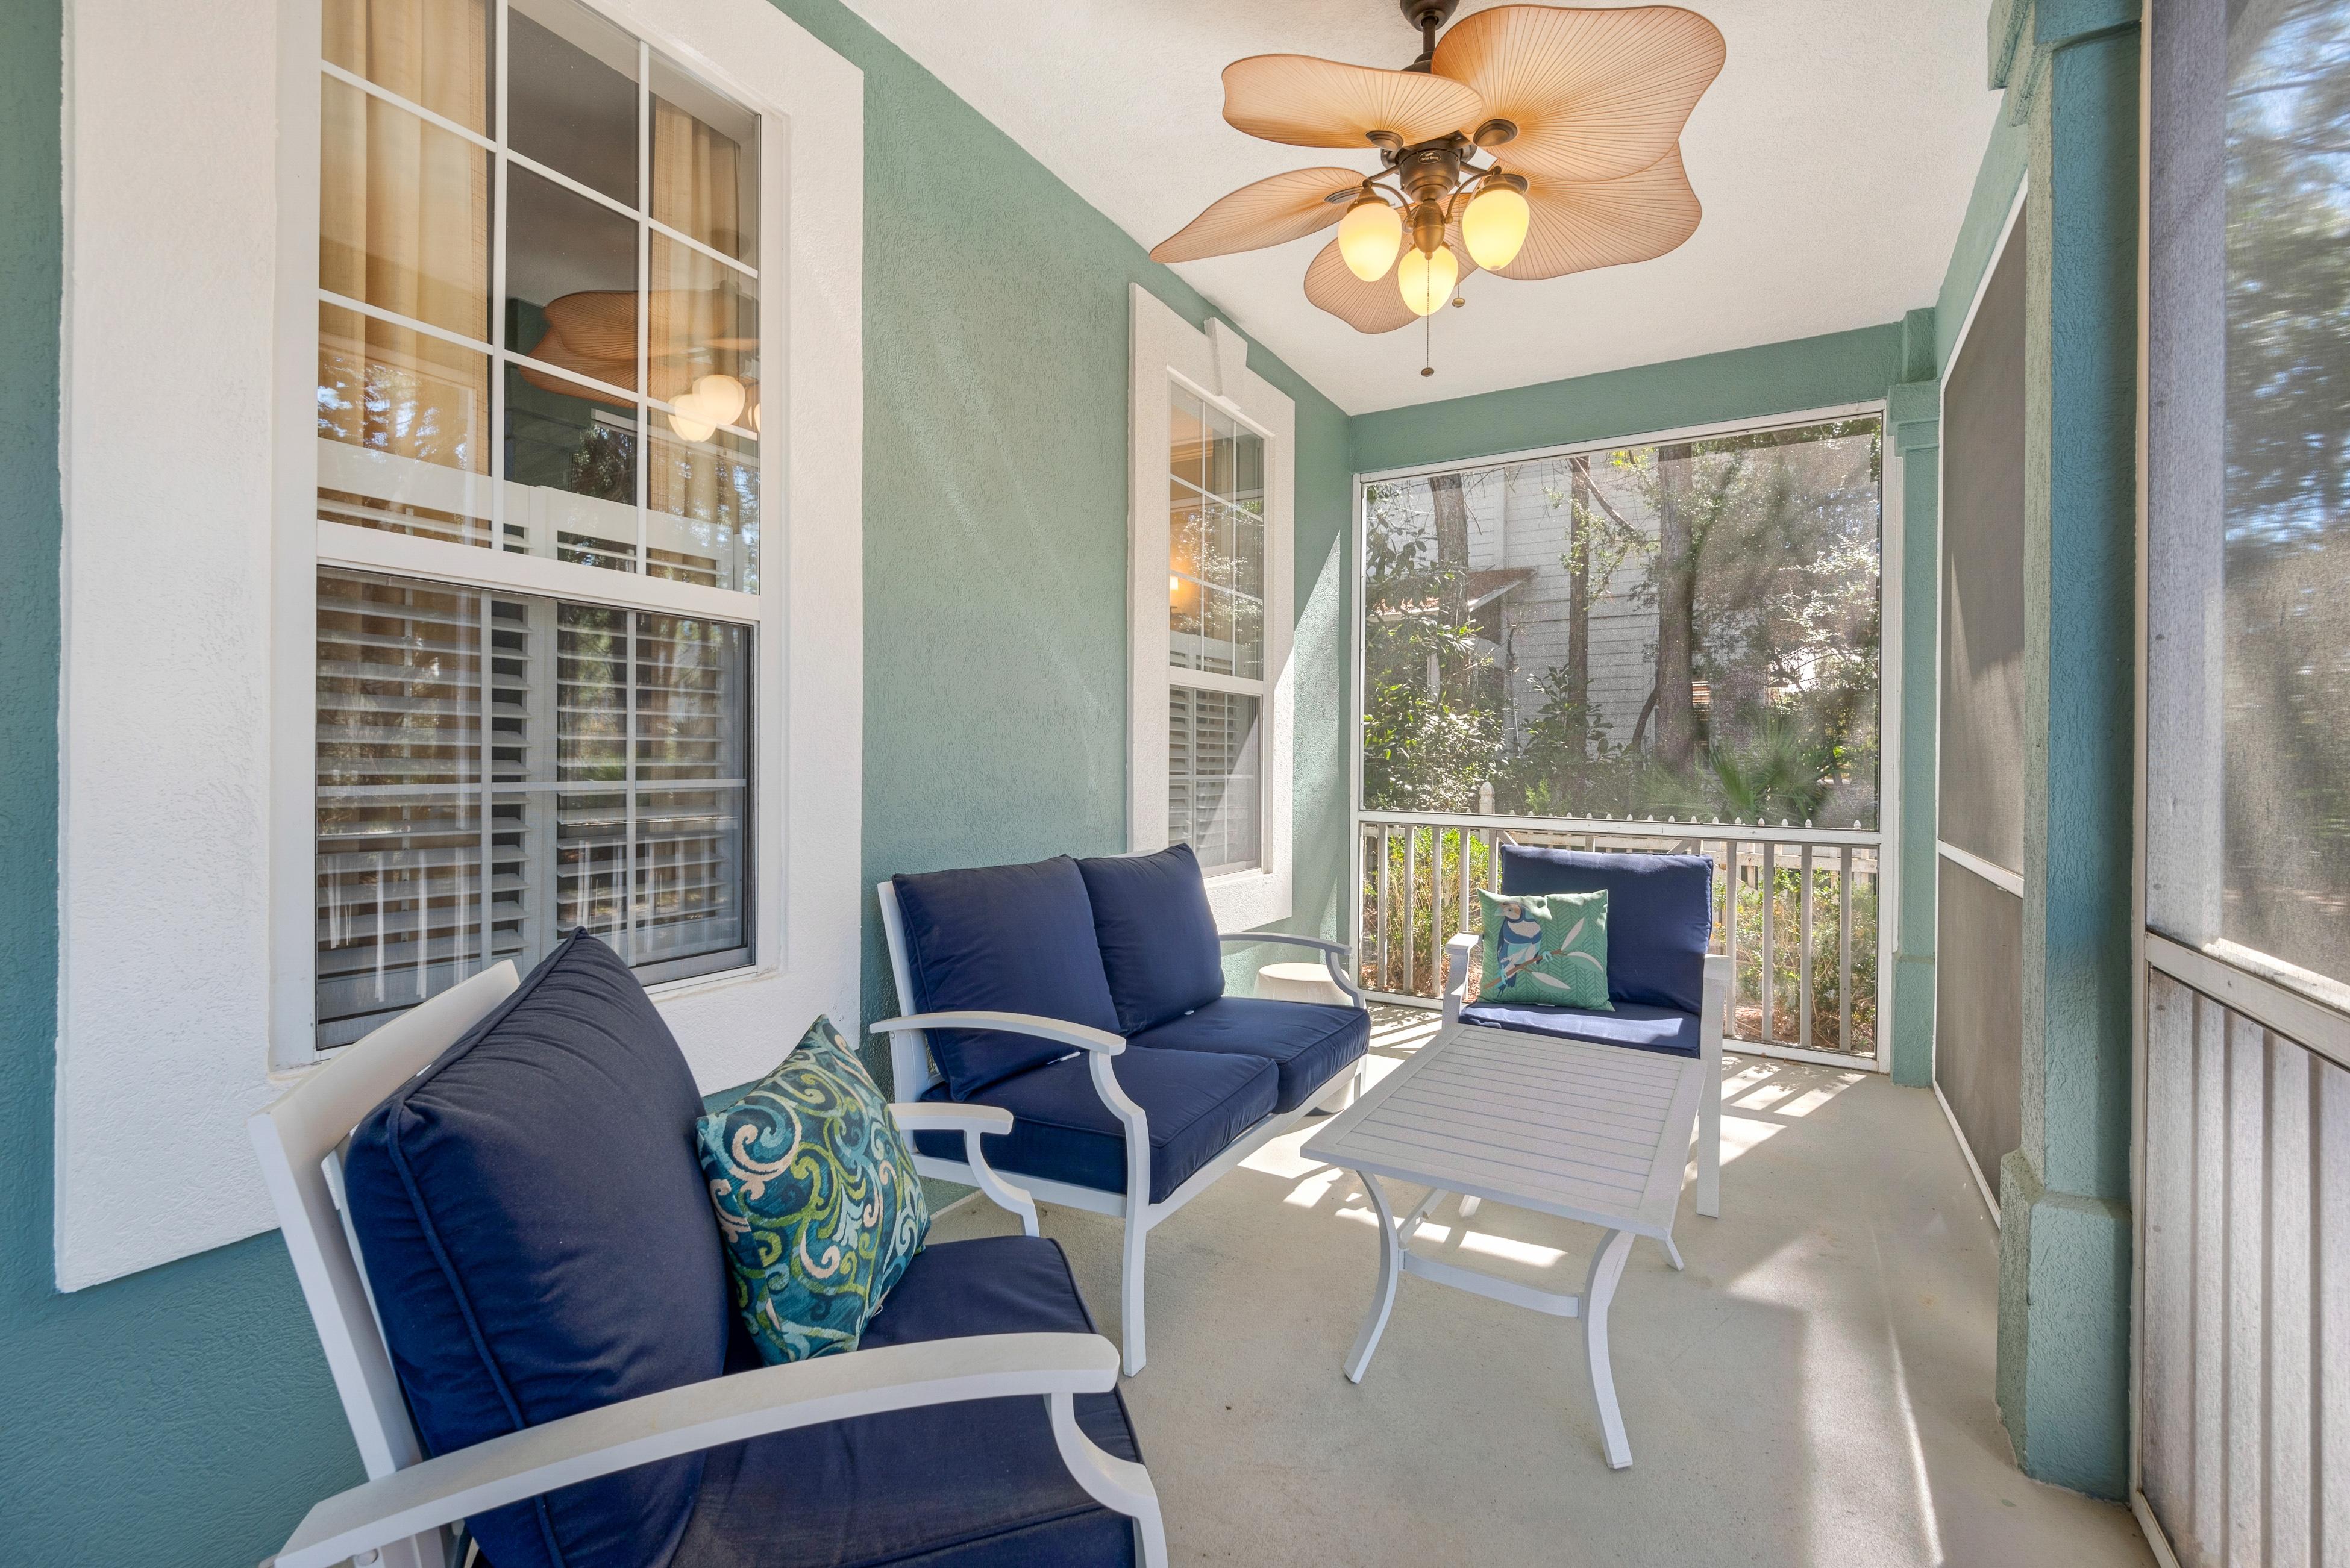 Property Image 2 - Seagrove Beach: Barefoot Bliss